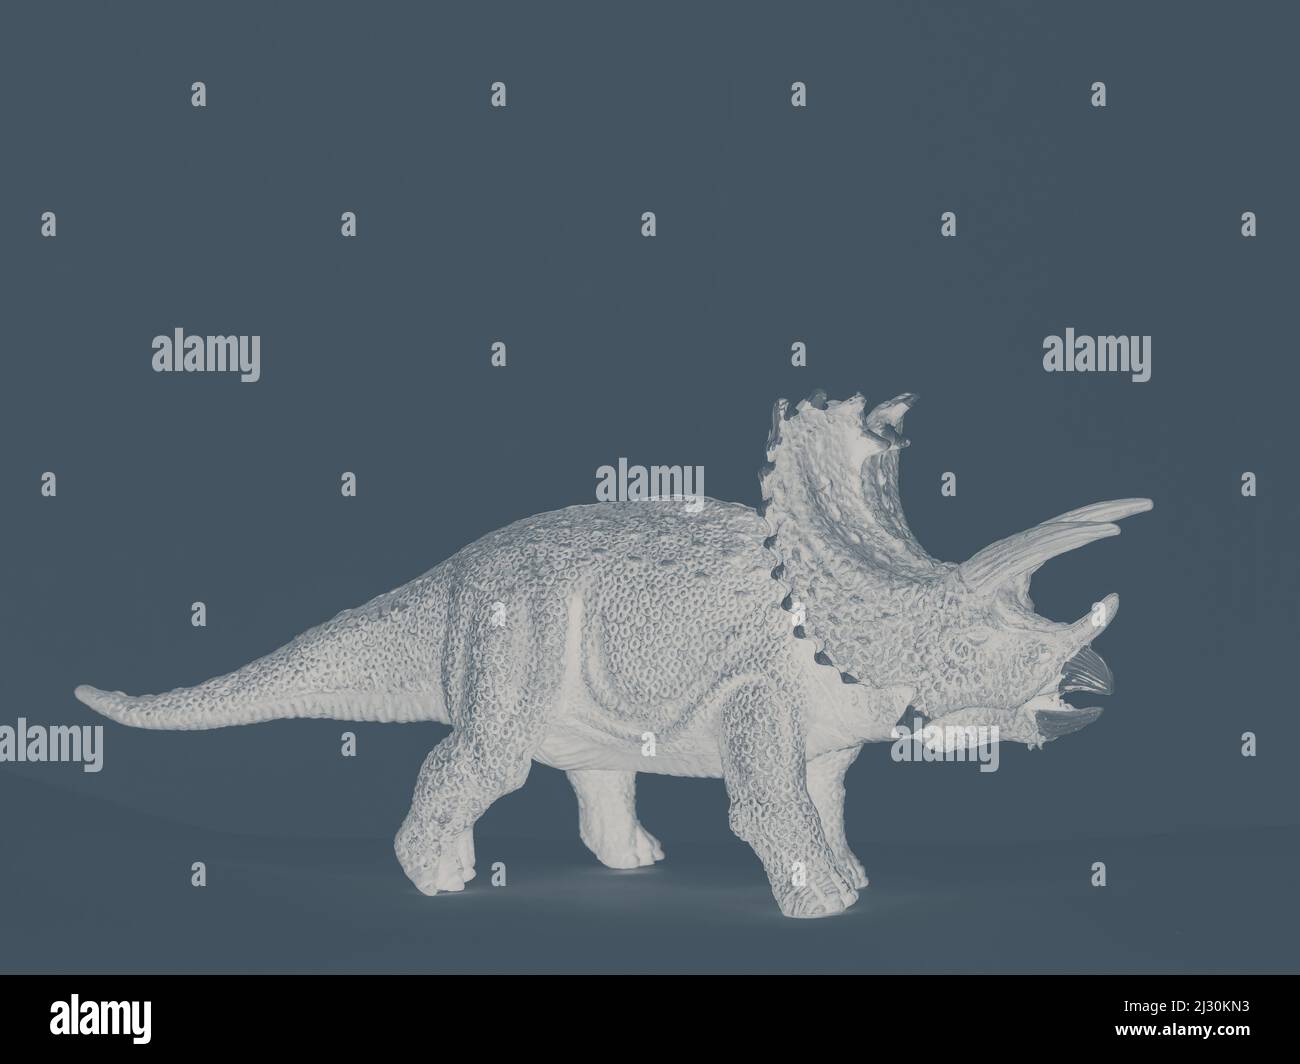 processed image of a plastic toy dinosaur Stock Photo